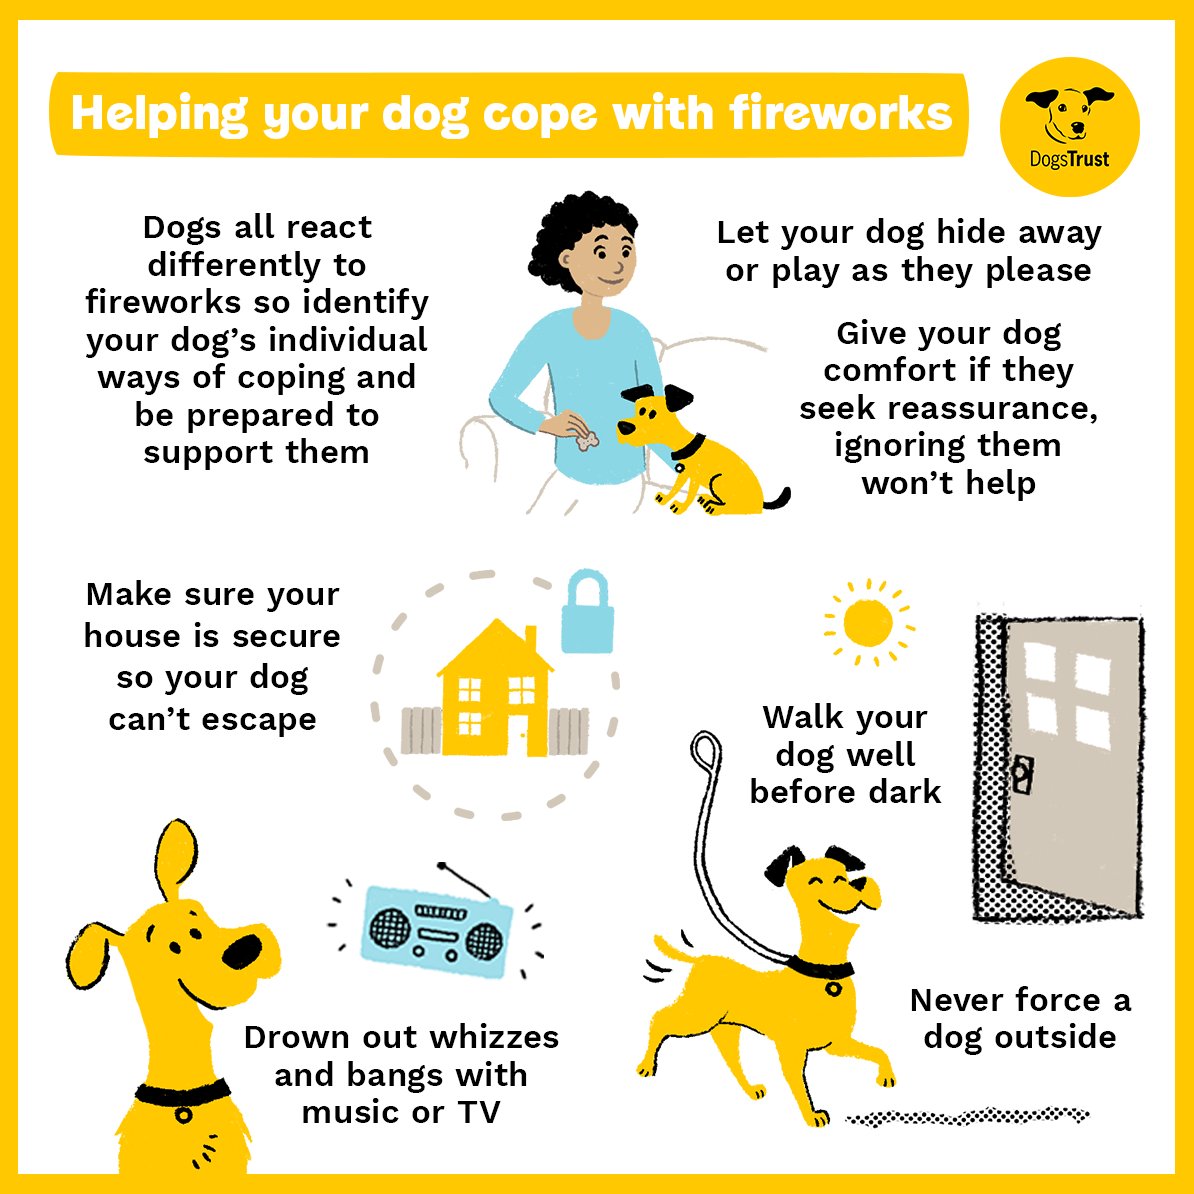 If you're worried about your dog because of #fireworks this #NewYearsEve, check out our top tips on how to make the night less stressful for your furry friend 🐶